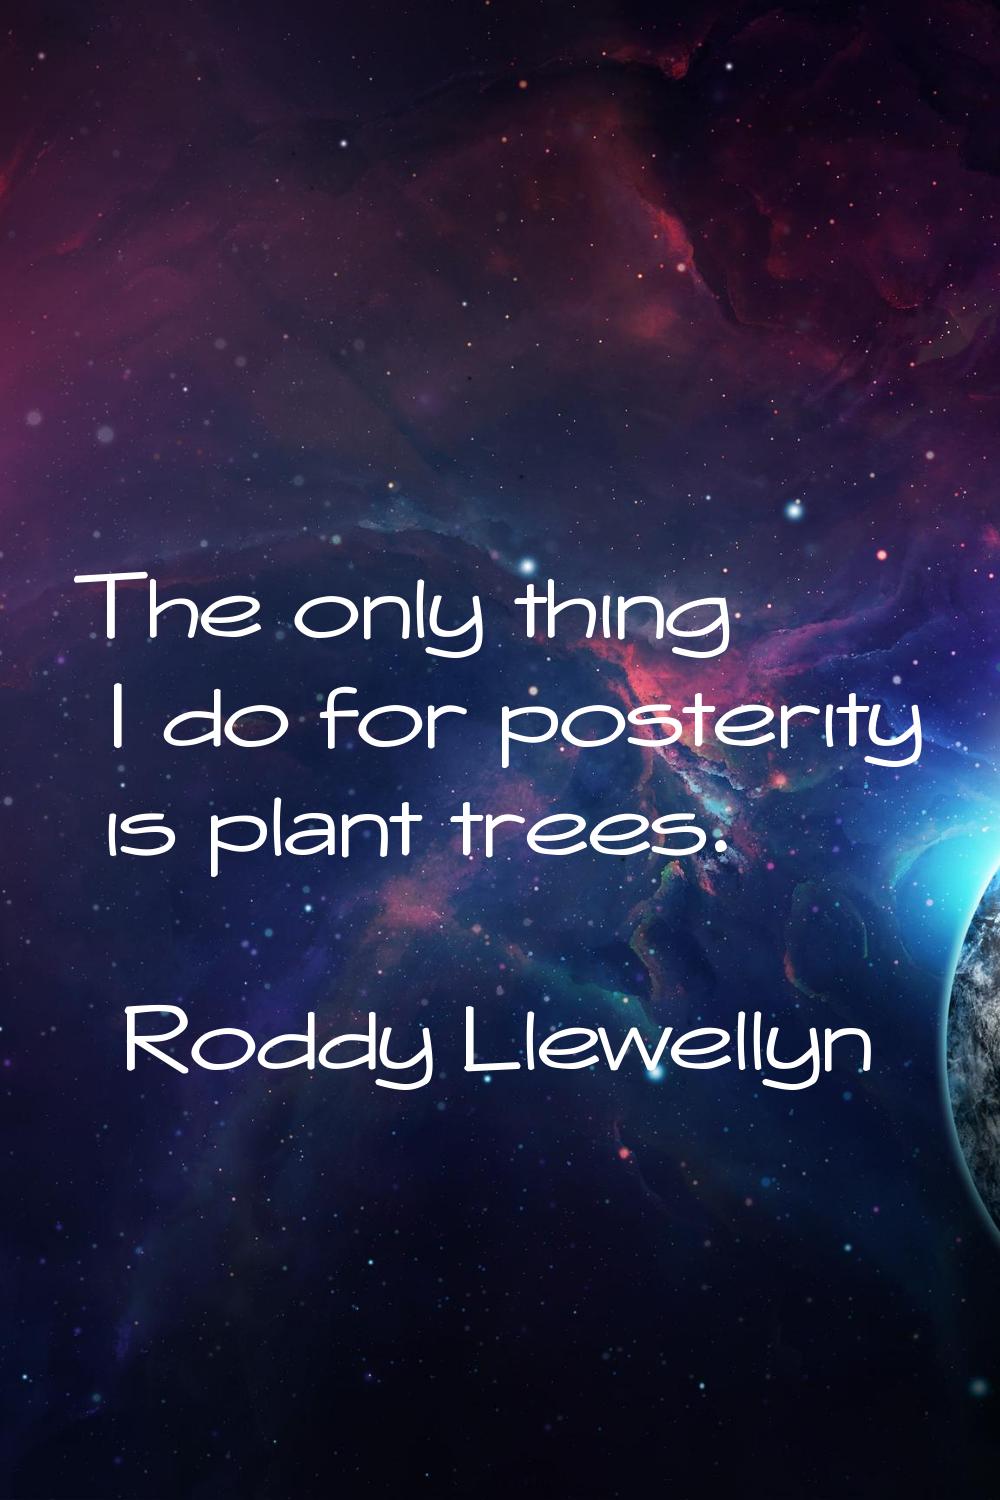 The only thing I do for posterity is plant trees.